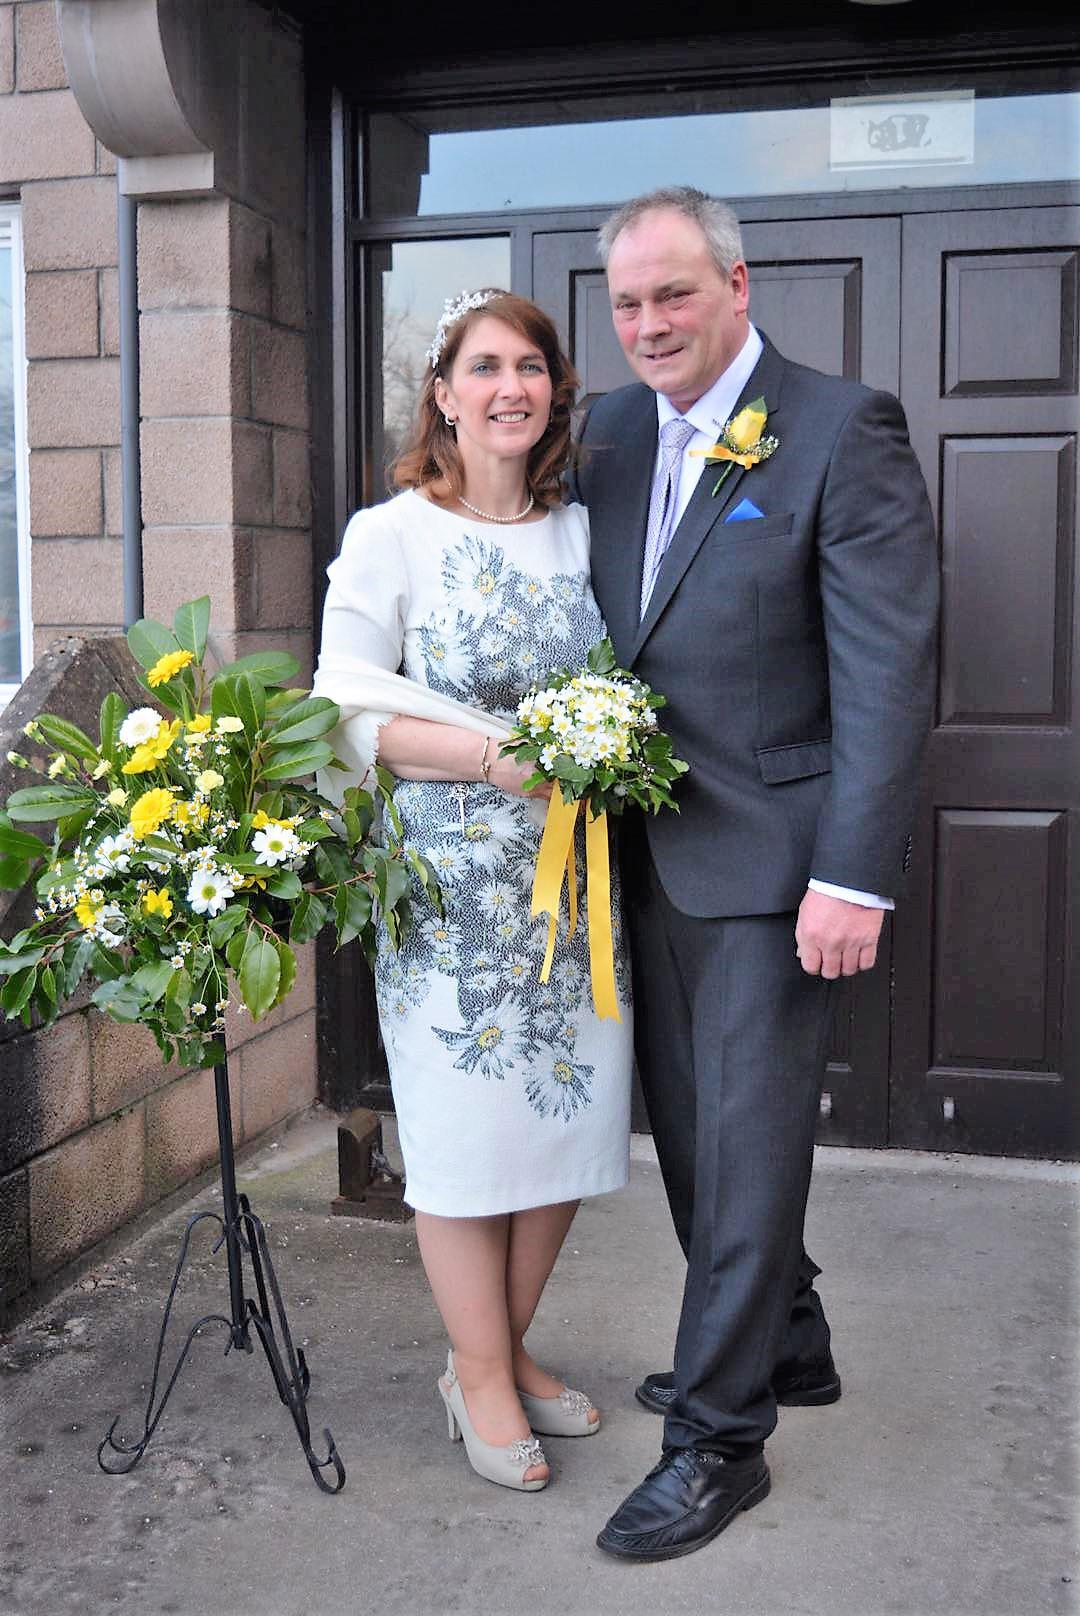 Agricultural contracting couple Pamela Airth and George Johnstone, of G&R Johnstone, Fallside, Drumlithie, surprised everyone by getting married earlier this year at Stonehaven Registry Office